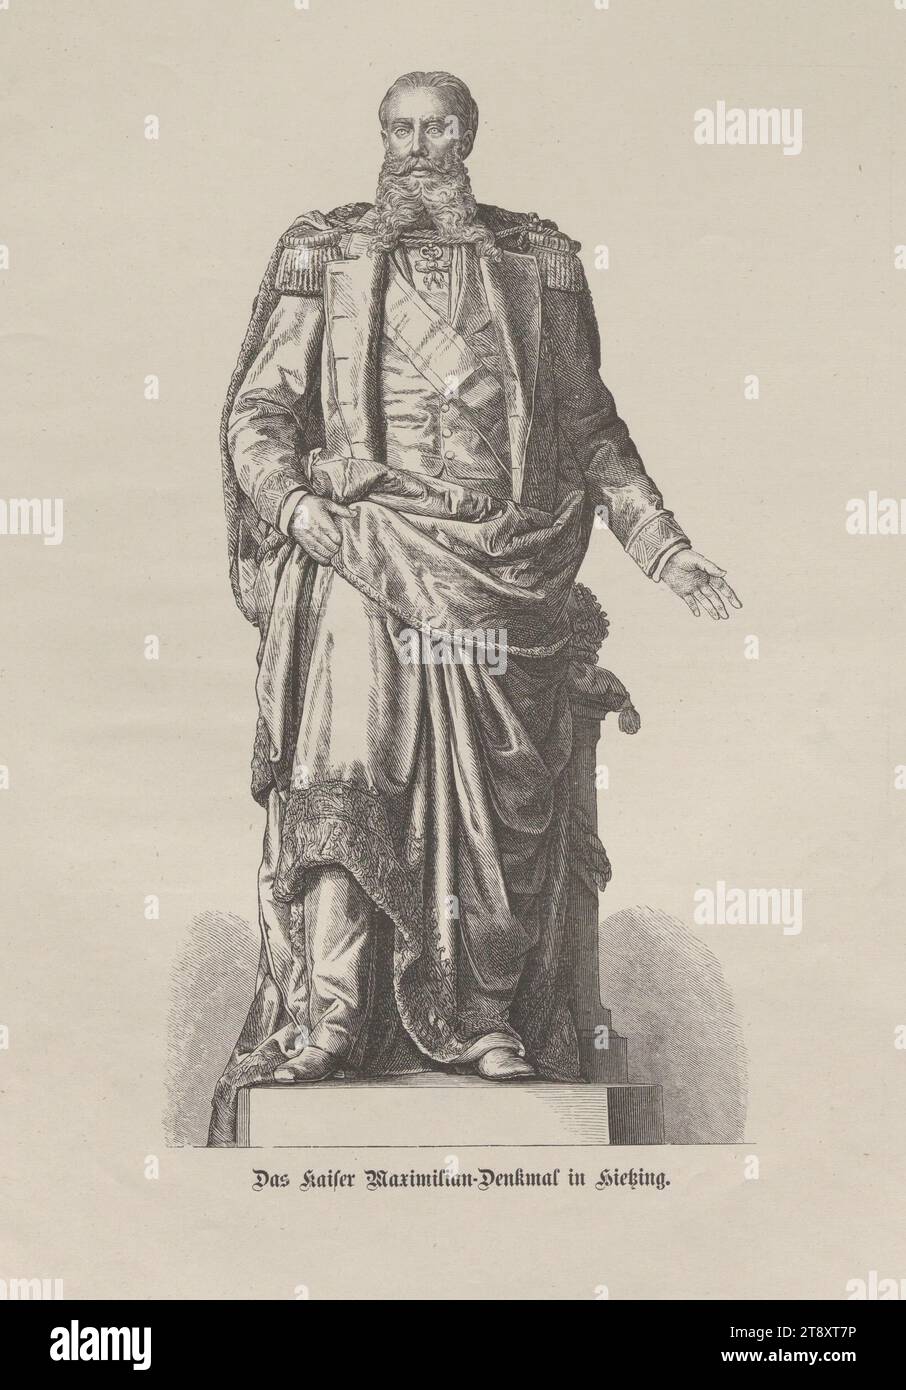 The Emperor Maximilian Monument in Hietzing', Unknown, 1872, paper, wood engraving, height 32, 4 cm, width 23, 4 cm, Habsburg, Fine Arts, Estate Constantin von Wurzbach, 13th District: Hietzing, portrait, ruler, sovereign, monument, statue, man, king; emperor, Emperor Maximilian of Mexico Monument, Maximilian I., Emperor of Mexico, The Vienna Collection Stock Photo